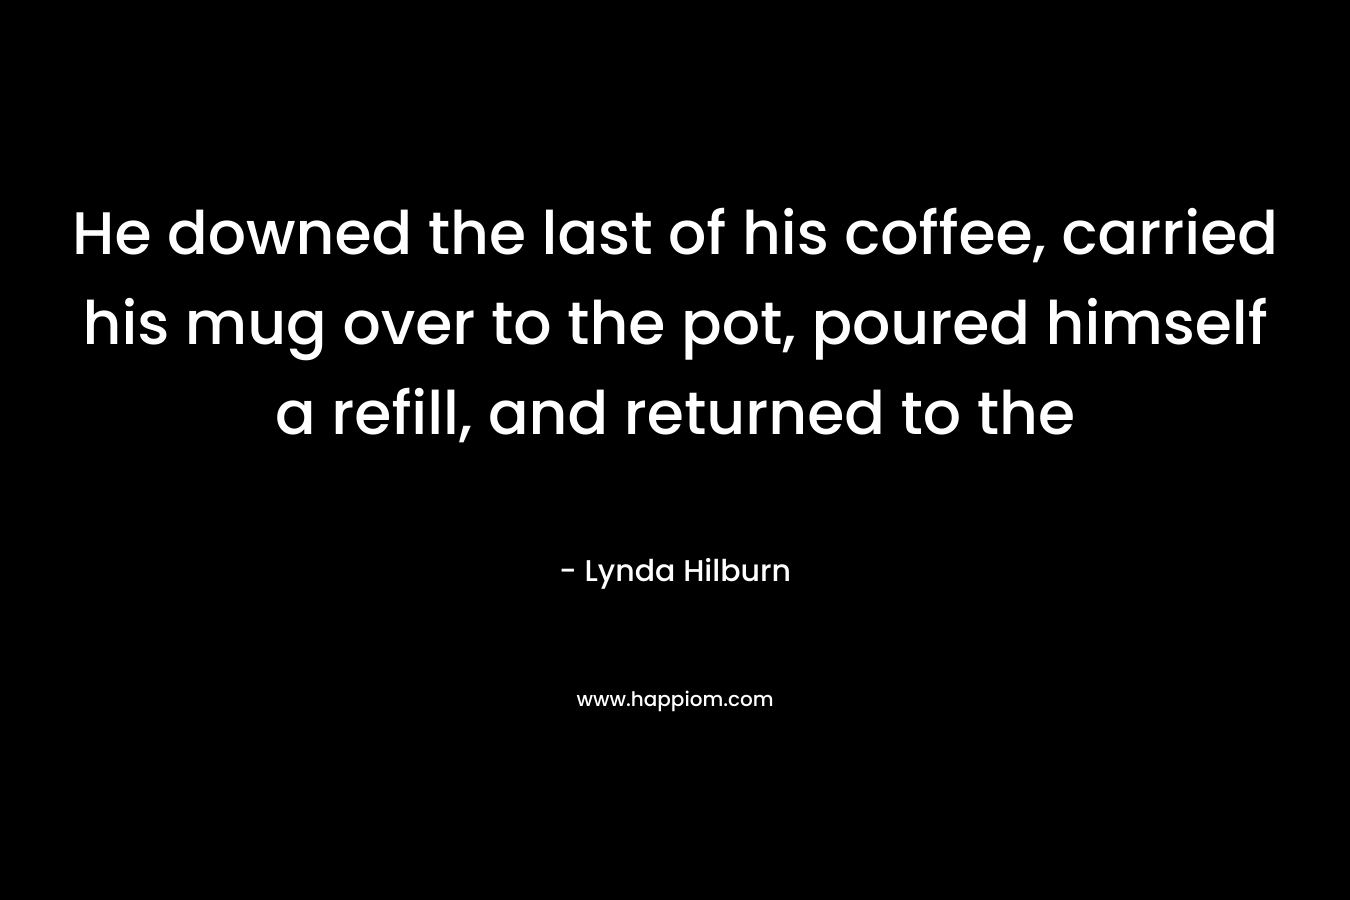 He downed the last of his coffee, carried his mug over to the pot, poured himself a refill, and returned to the 